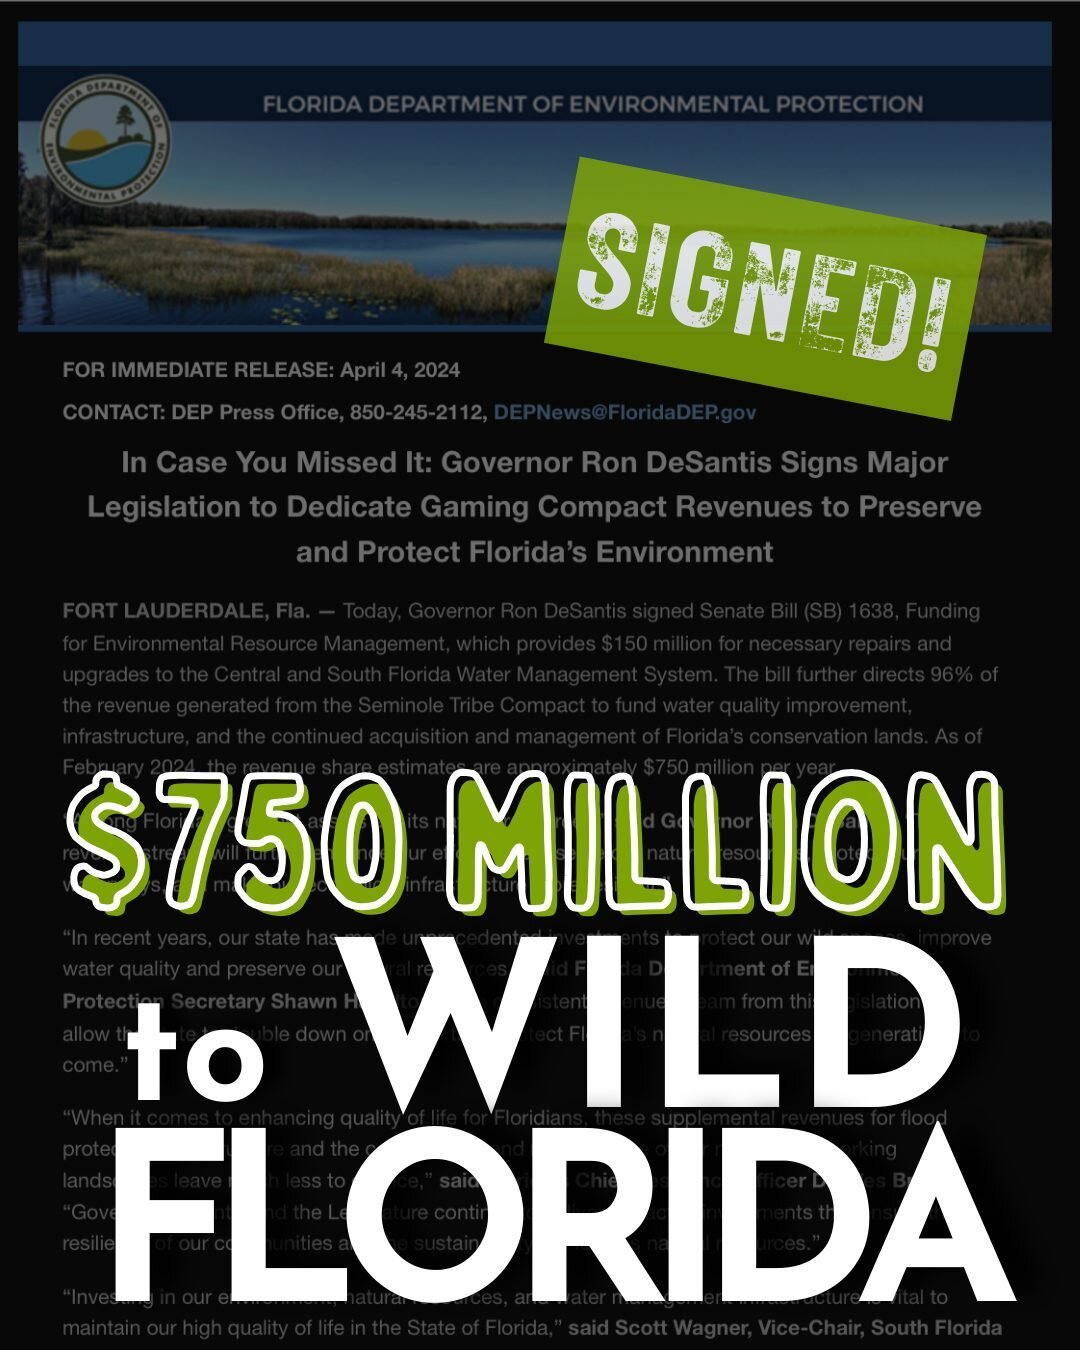 🚨 𝗚𝗢𝗢𝗗 𝗡𝗘𝗪𝗦 𝗔𝗟𝗘𝗥𝗧! 🚨

Governor DeSantis just signed Senate Bill (SB) 1638, which allocates revenue from the Seminole Tribe Compact to Florida land conservation &amp; water quality efforts. Funds are estimated to be approximately $𝟳𝟱?